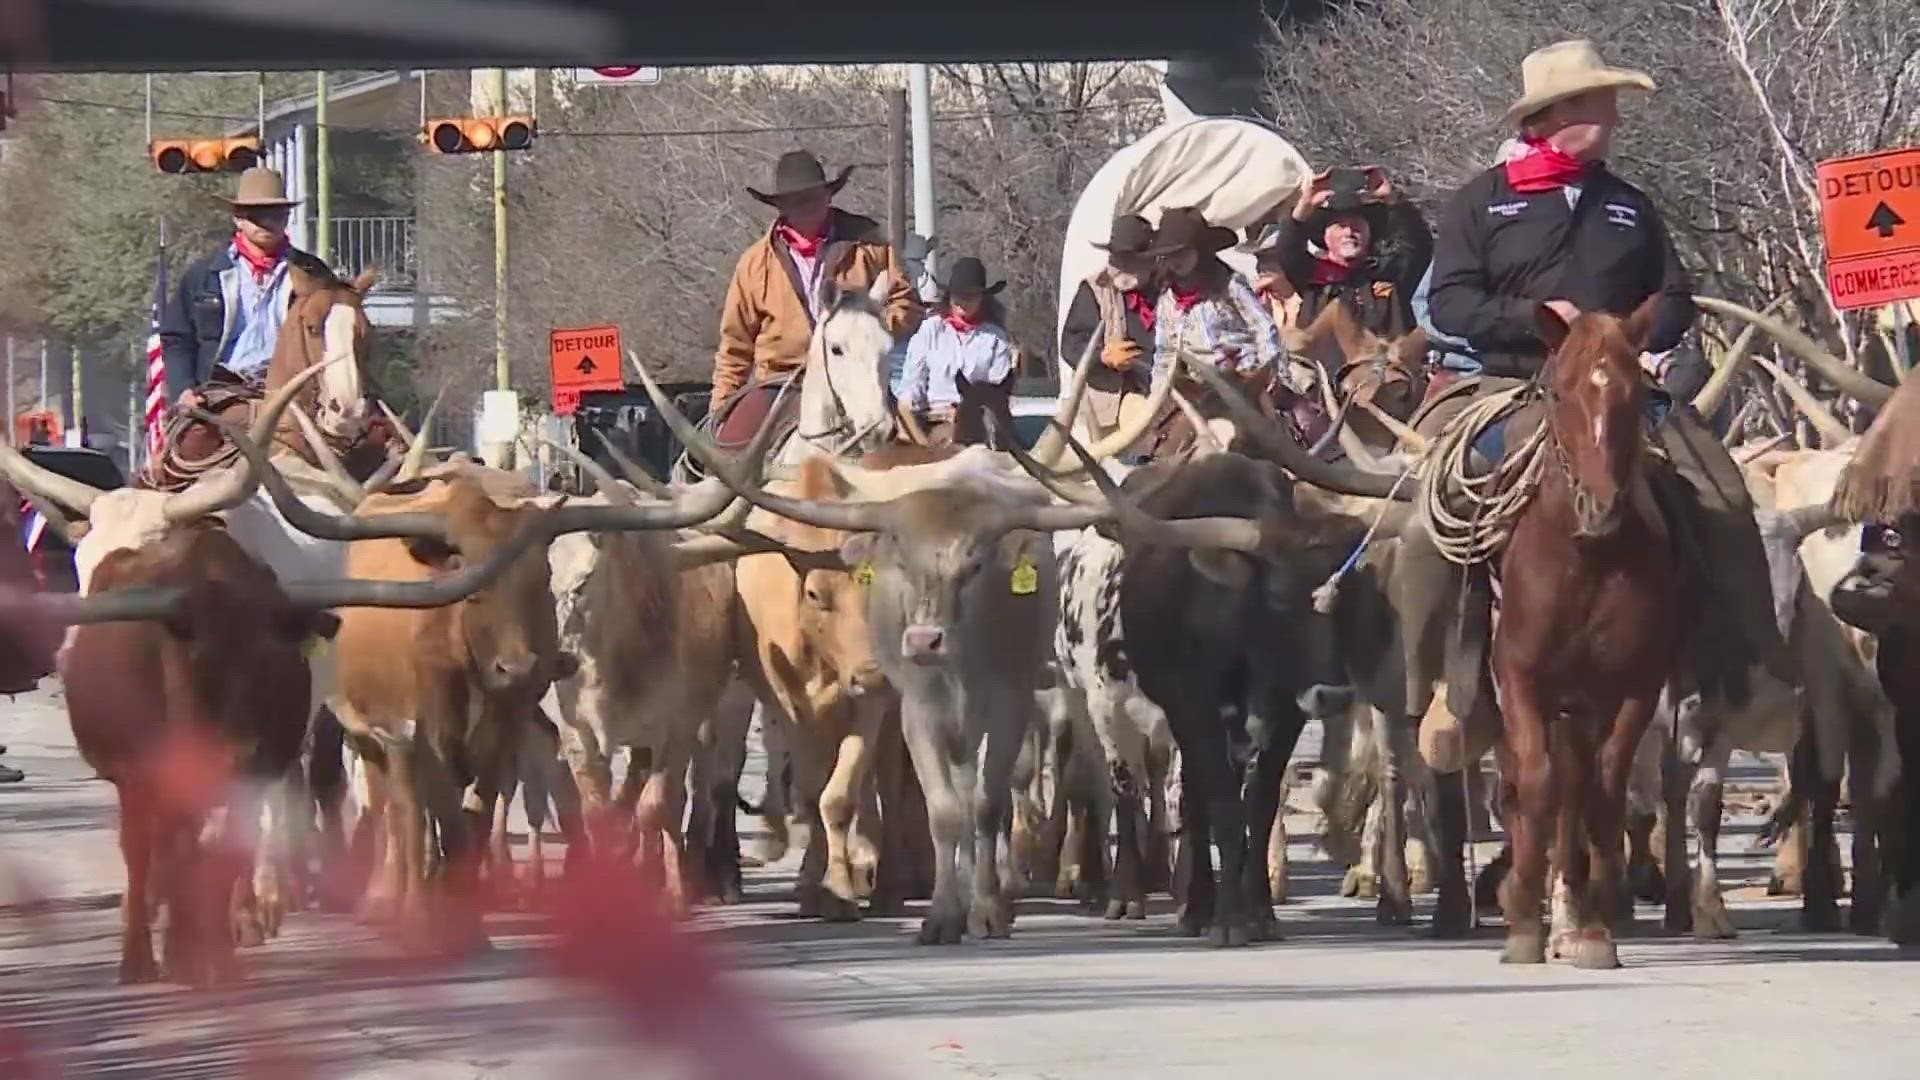 The San Antonio Stock Show and Rodeo kicked off their livestock events with a parade and cattle drive Saturday morning.